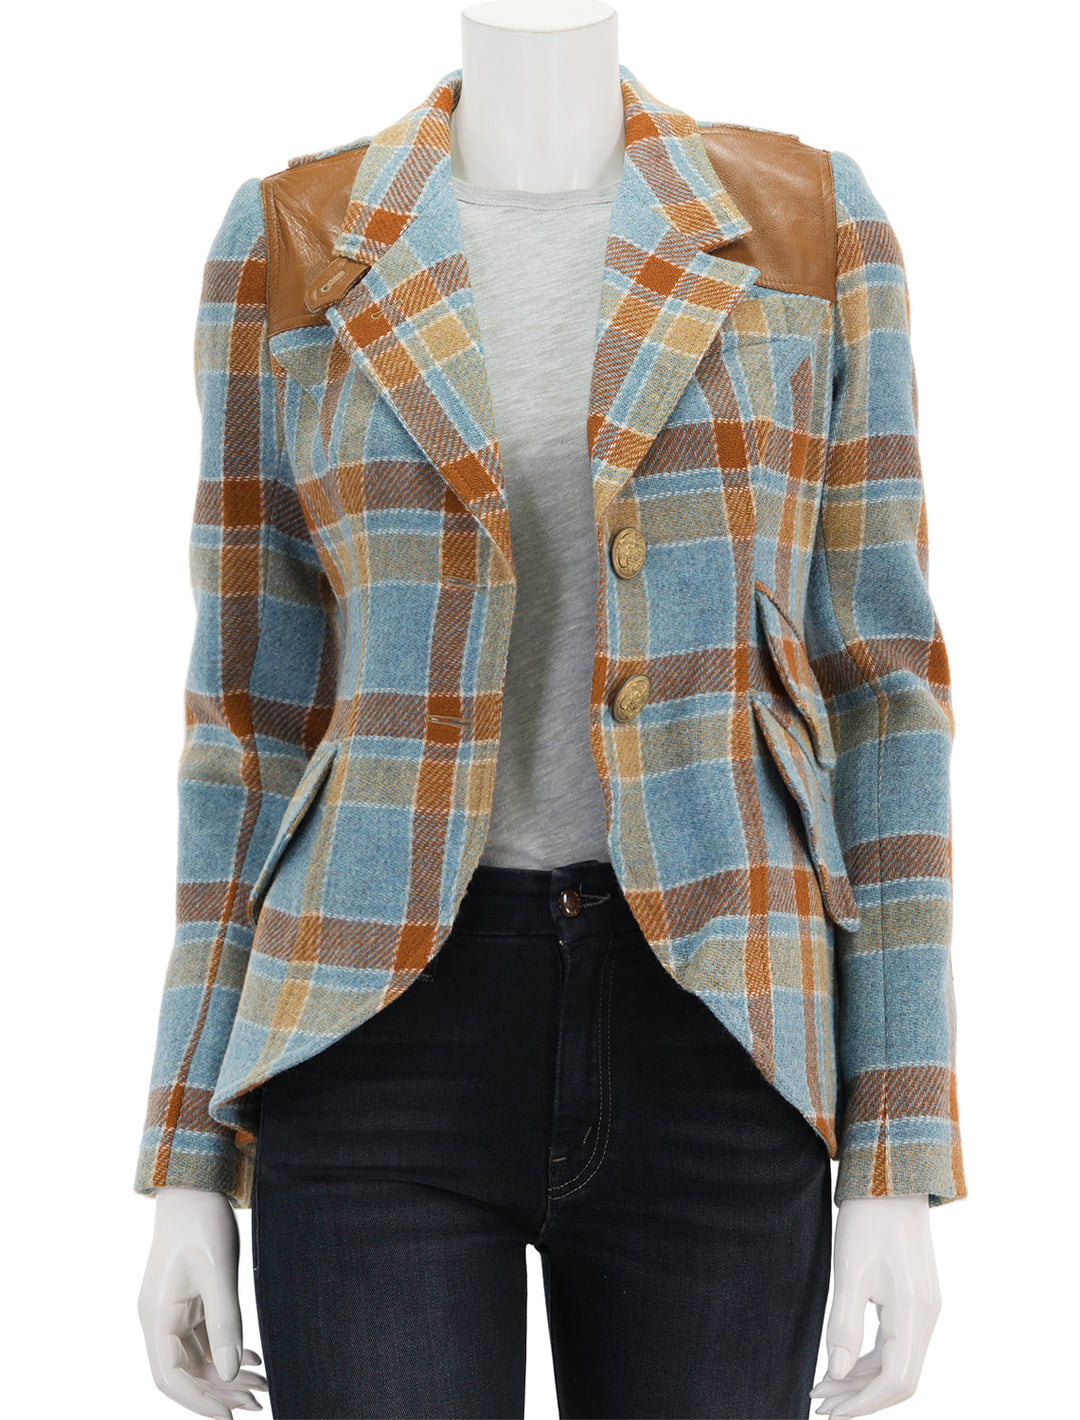 Front view of Smythe's hunting blazer in blue and rust plaid, unbuttoned.